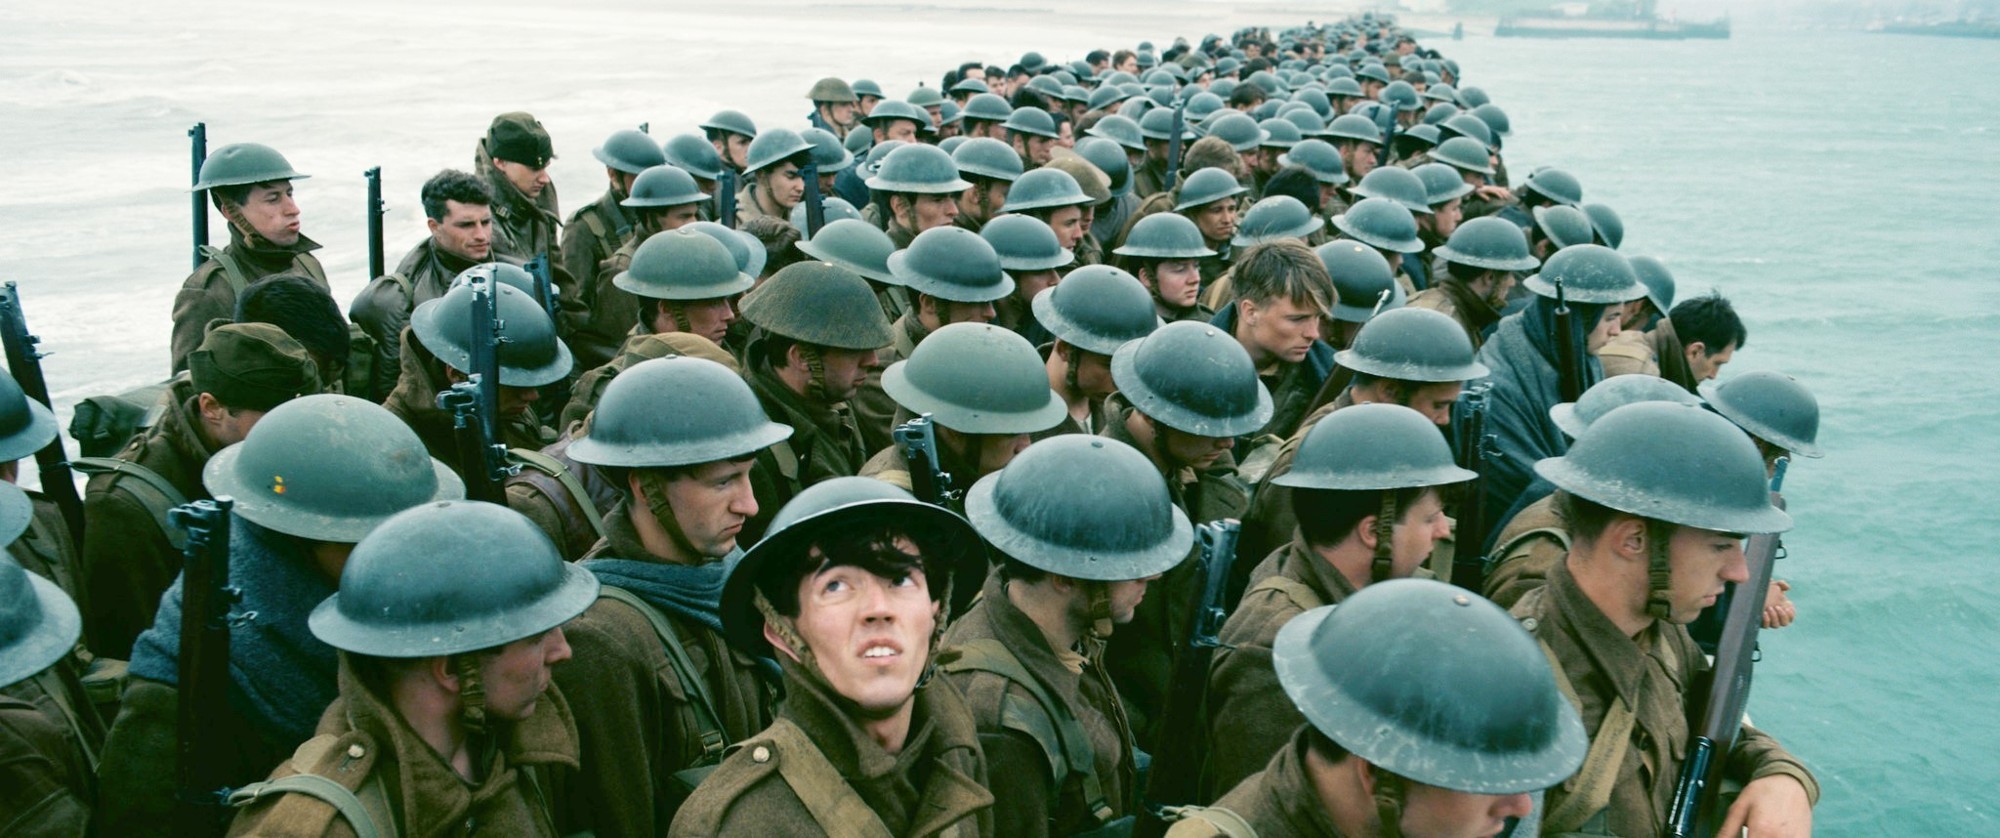 A scene from Warner Bros. Pictures' Dunkirk (2017)